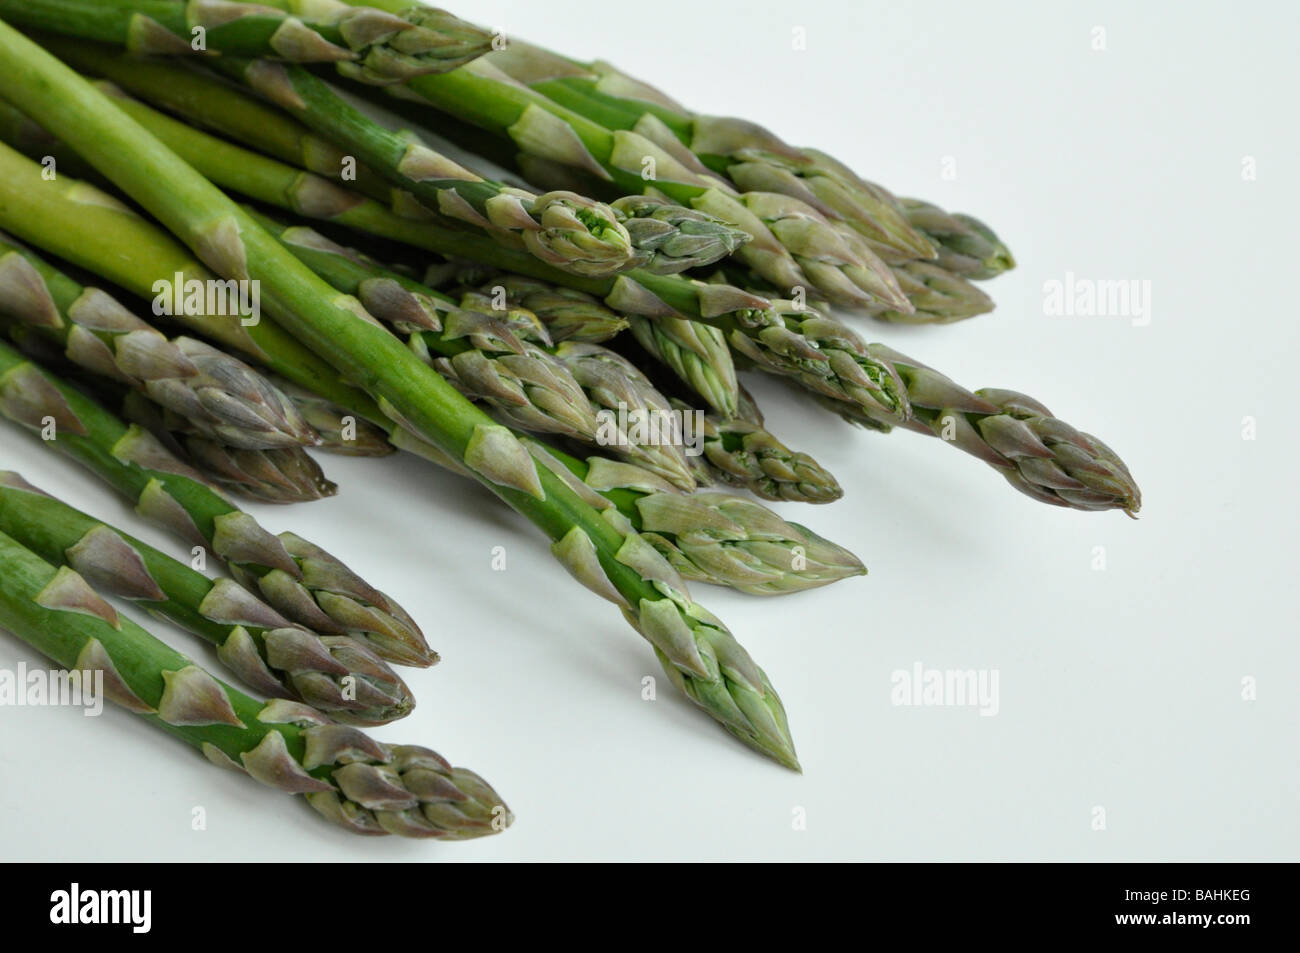 Asparagus tips on a white background Stock Photo